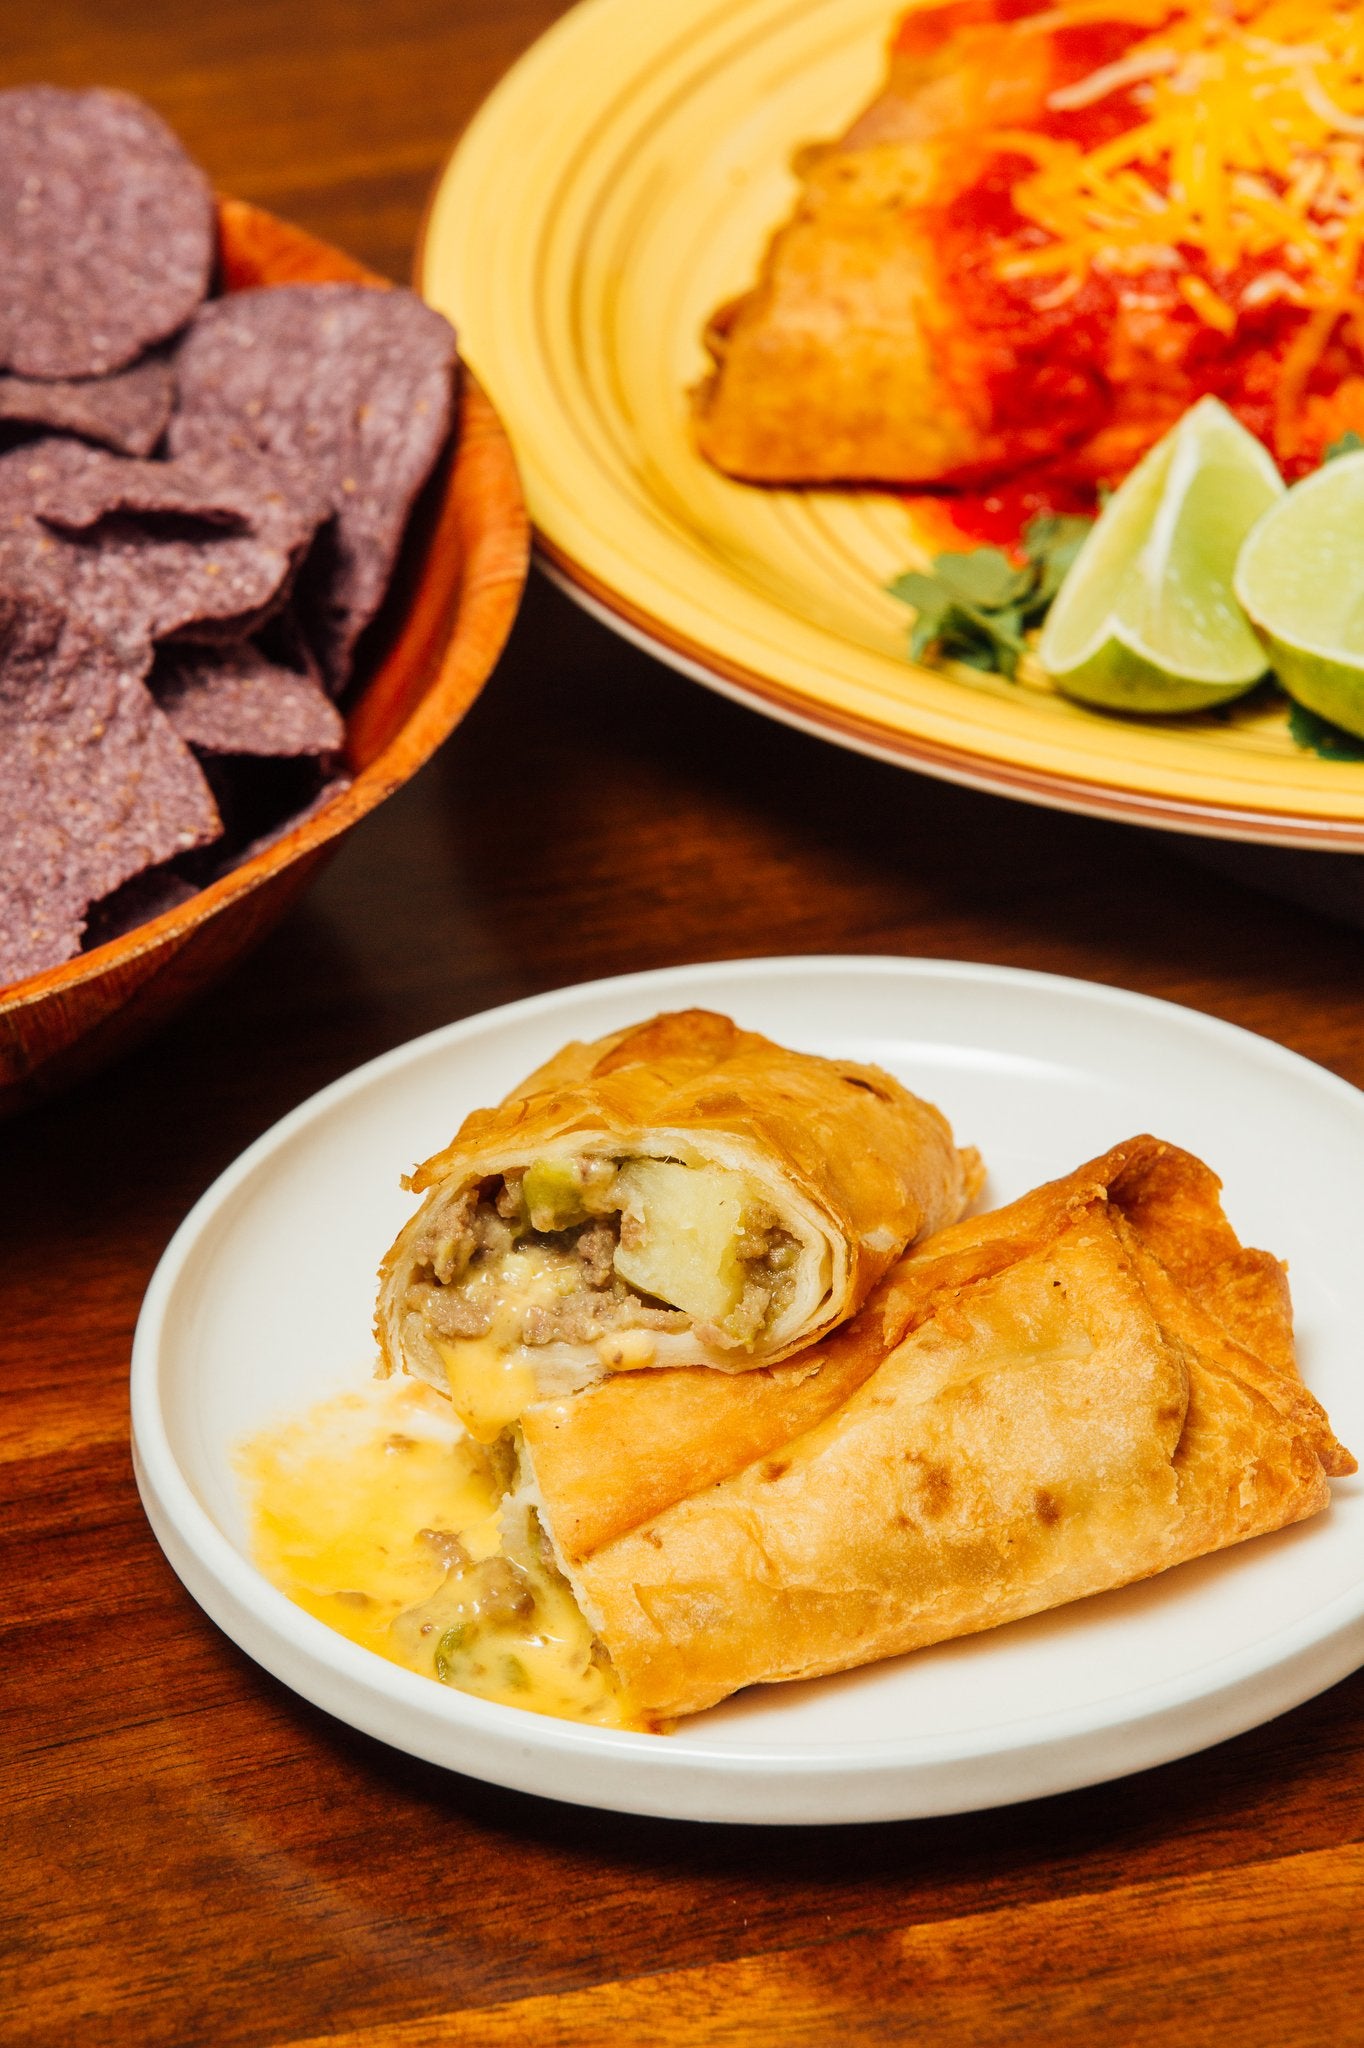 Beef and cheddar chimichangas